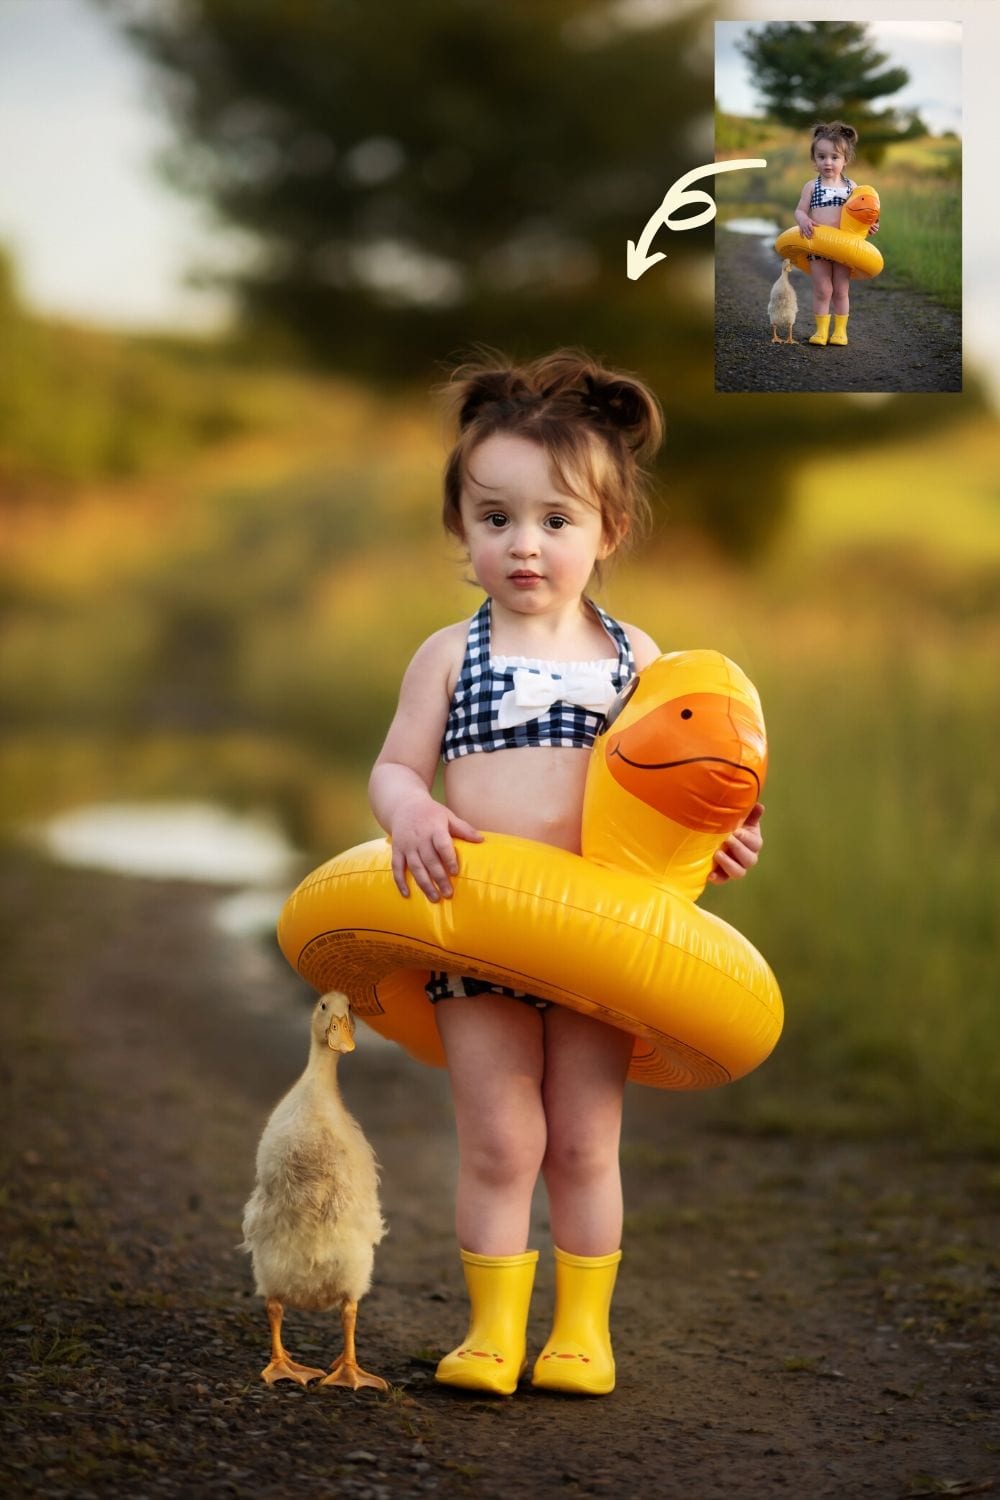 How to edit kids and animals in Photoshop The Cozy Clicks Ultimate Pro Editing Membership  Learn Photoshop editing techniques